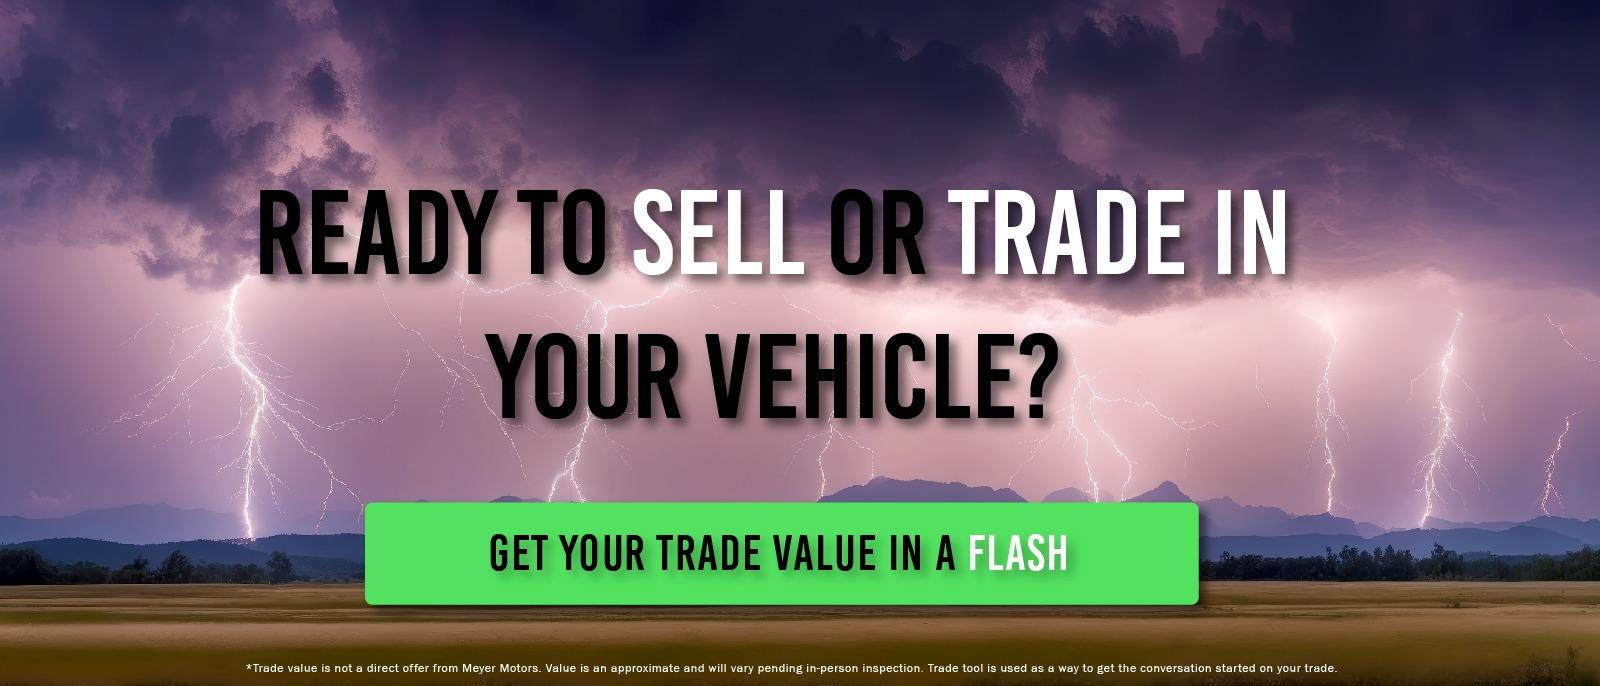 Ready to sell or trade in your vehicle?
Click here for a 10 second vehicle value*